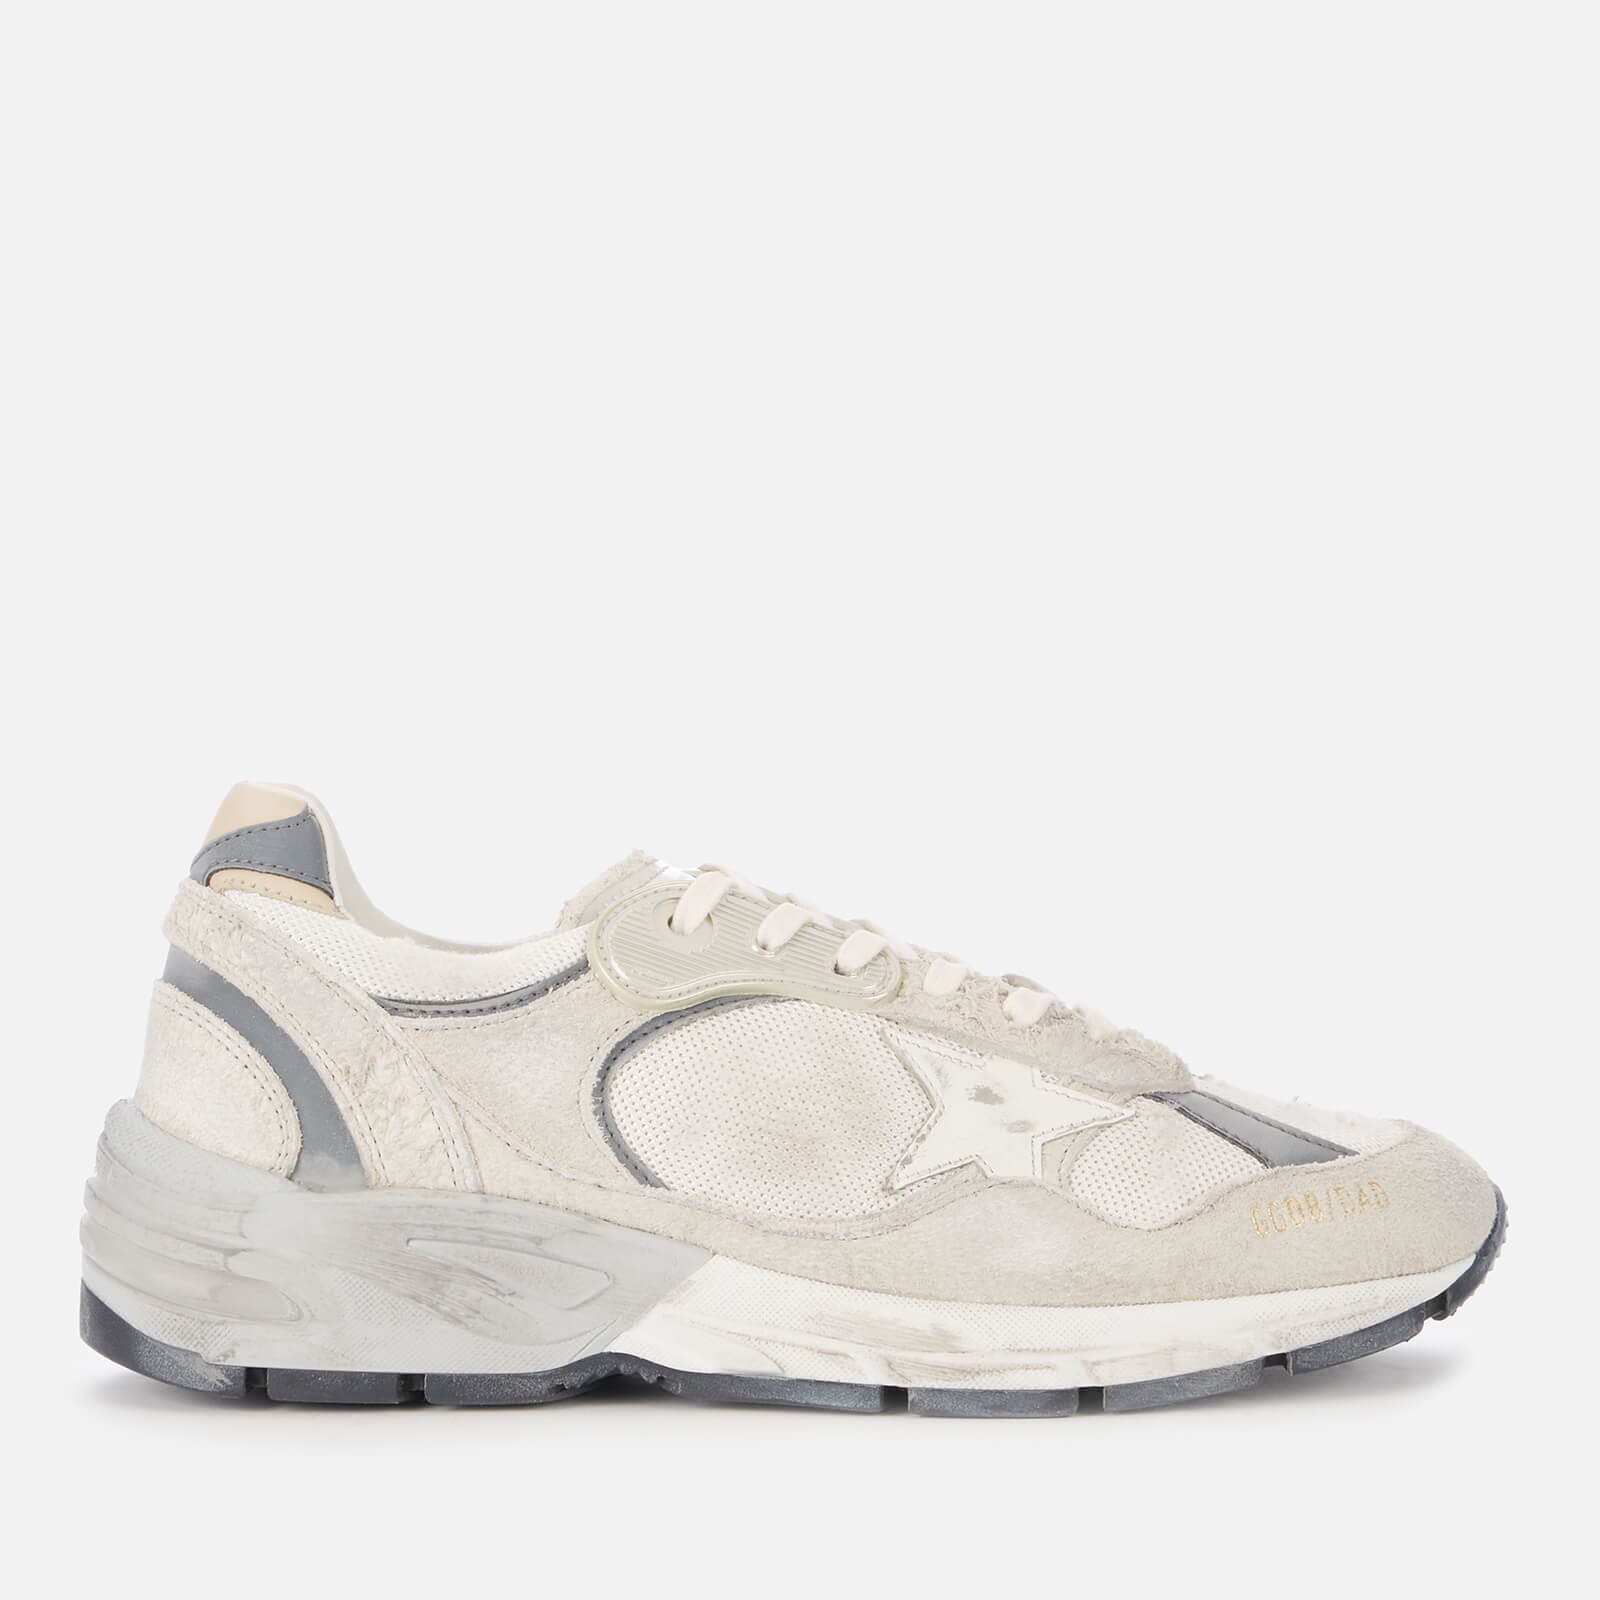 Golden Goose Women's Running Dad Trainers - White/Silver - UK 3